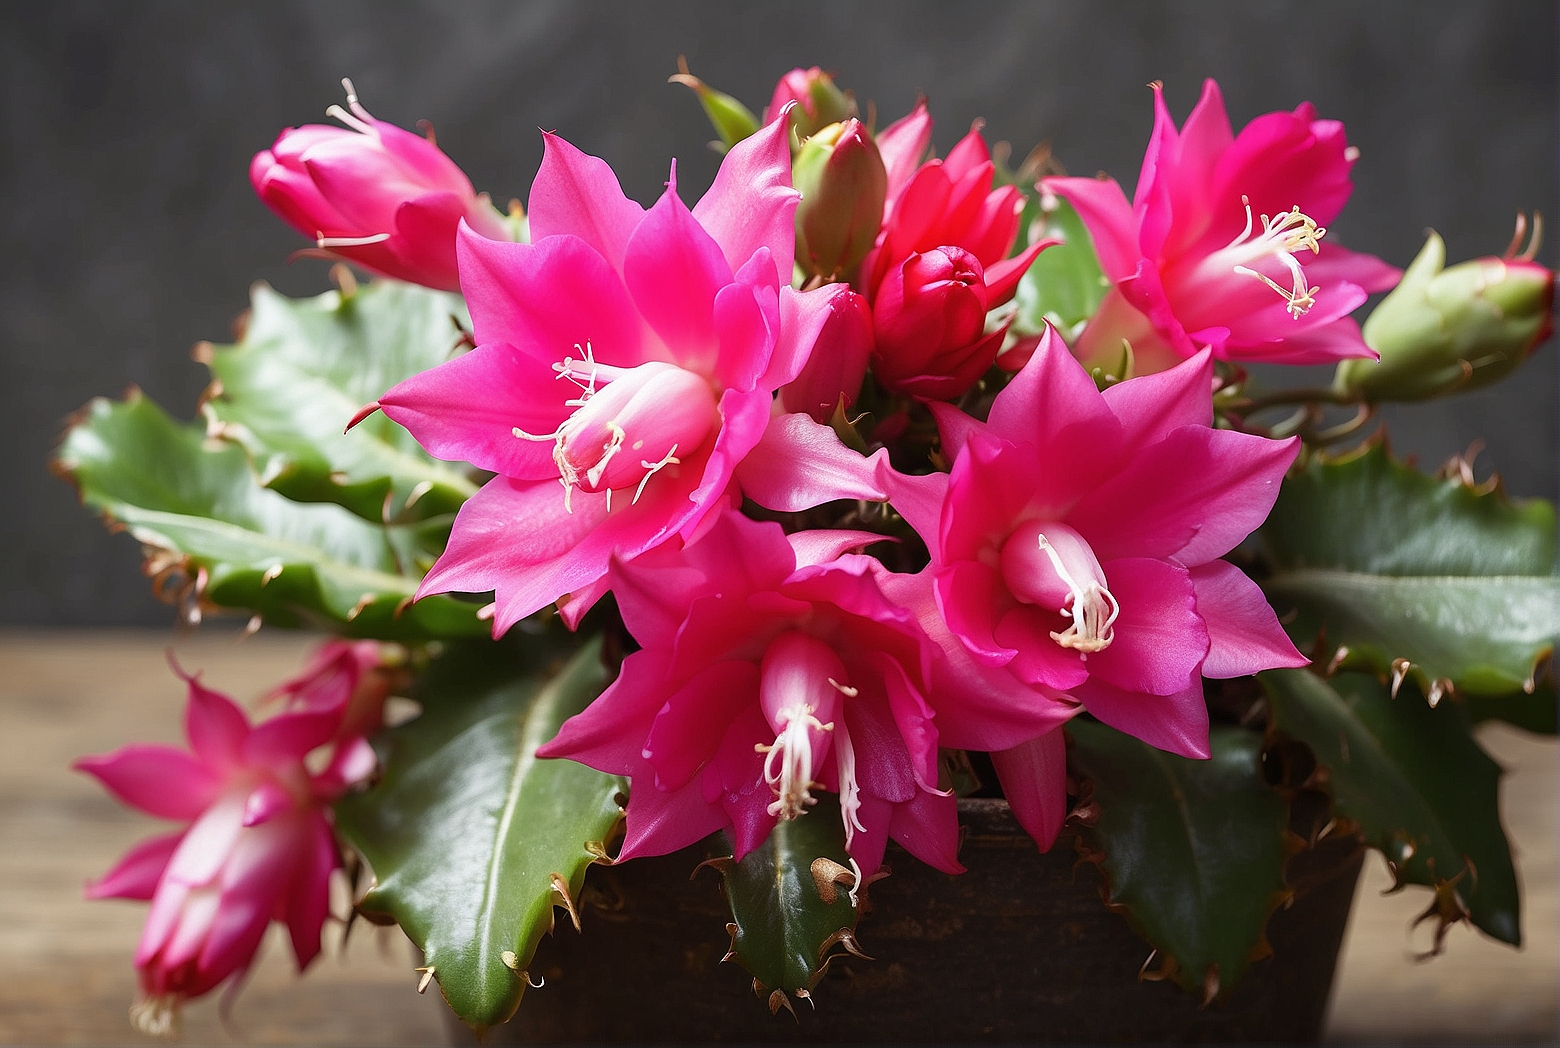 The Ultimate Guide to Growing Christmas Cactus